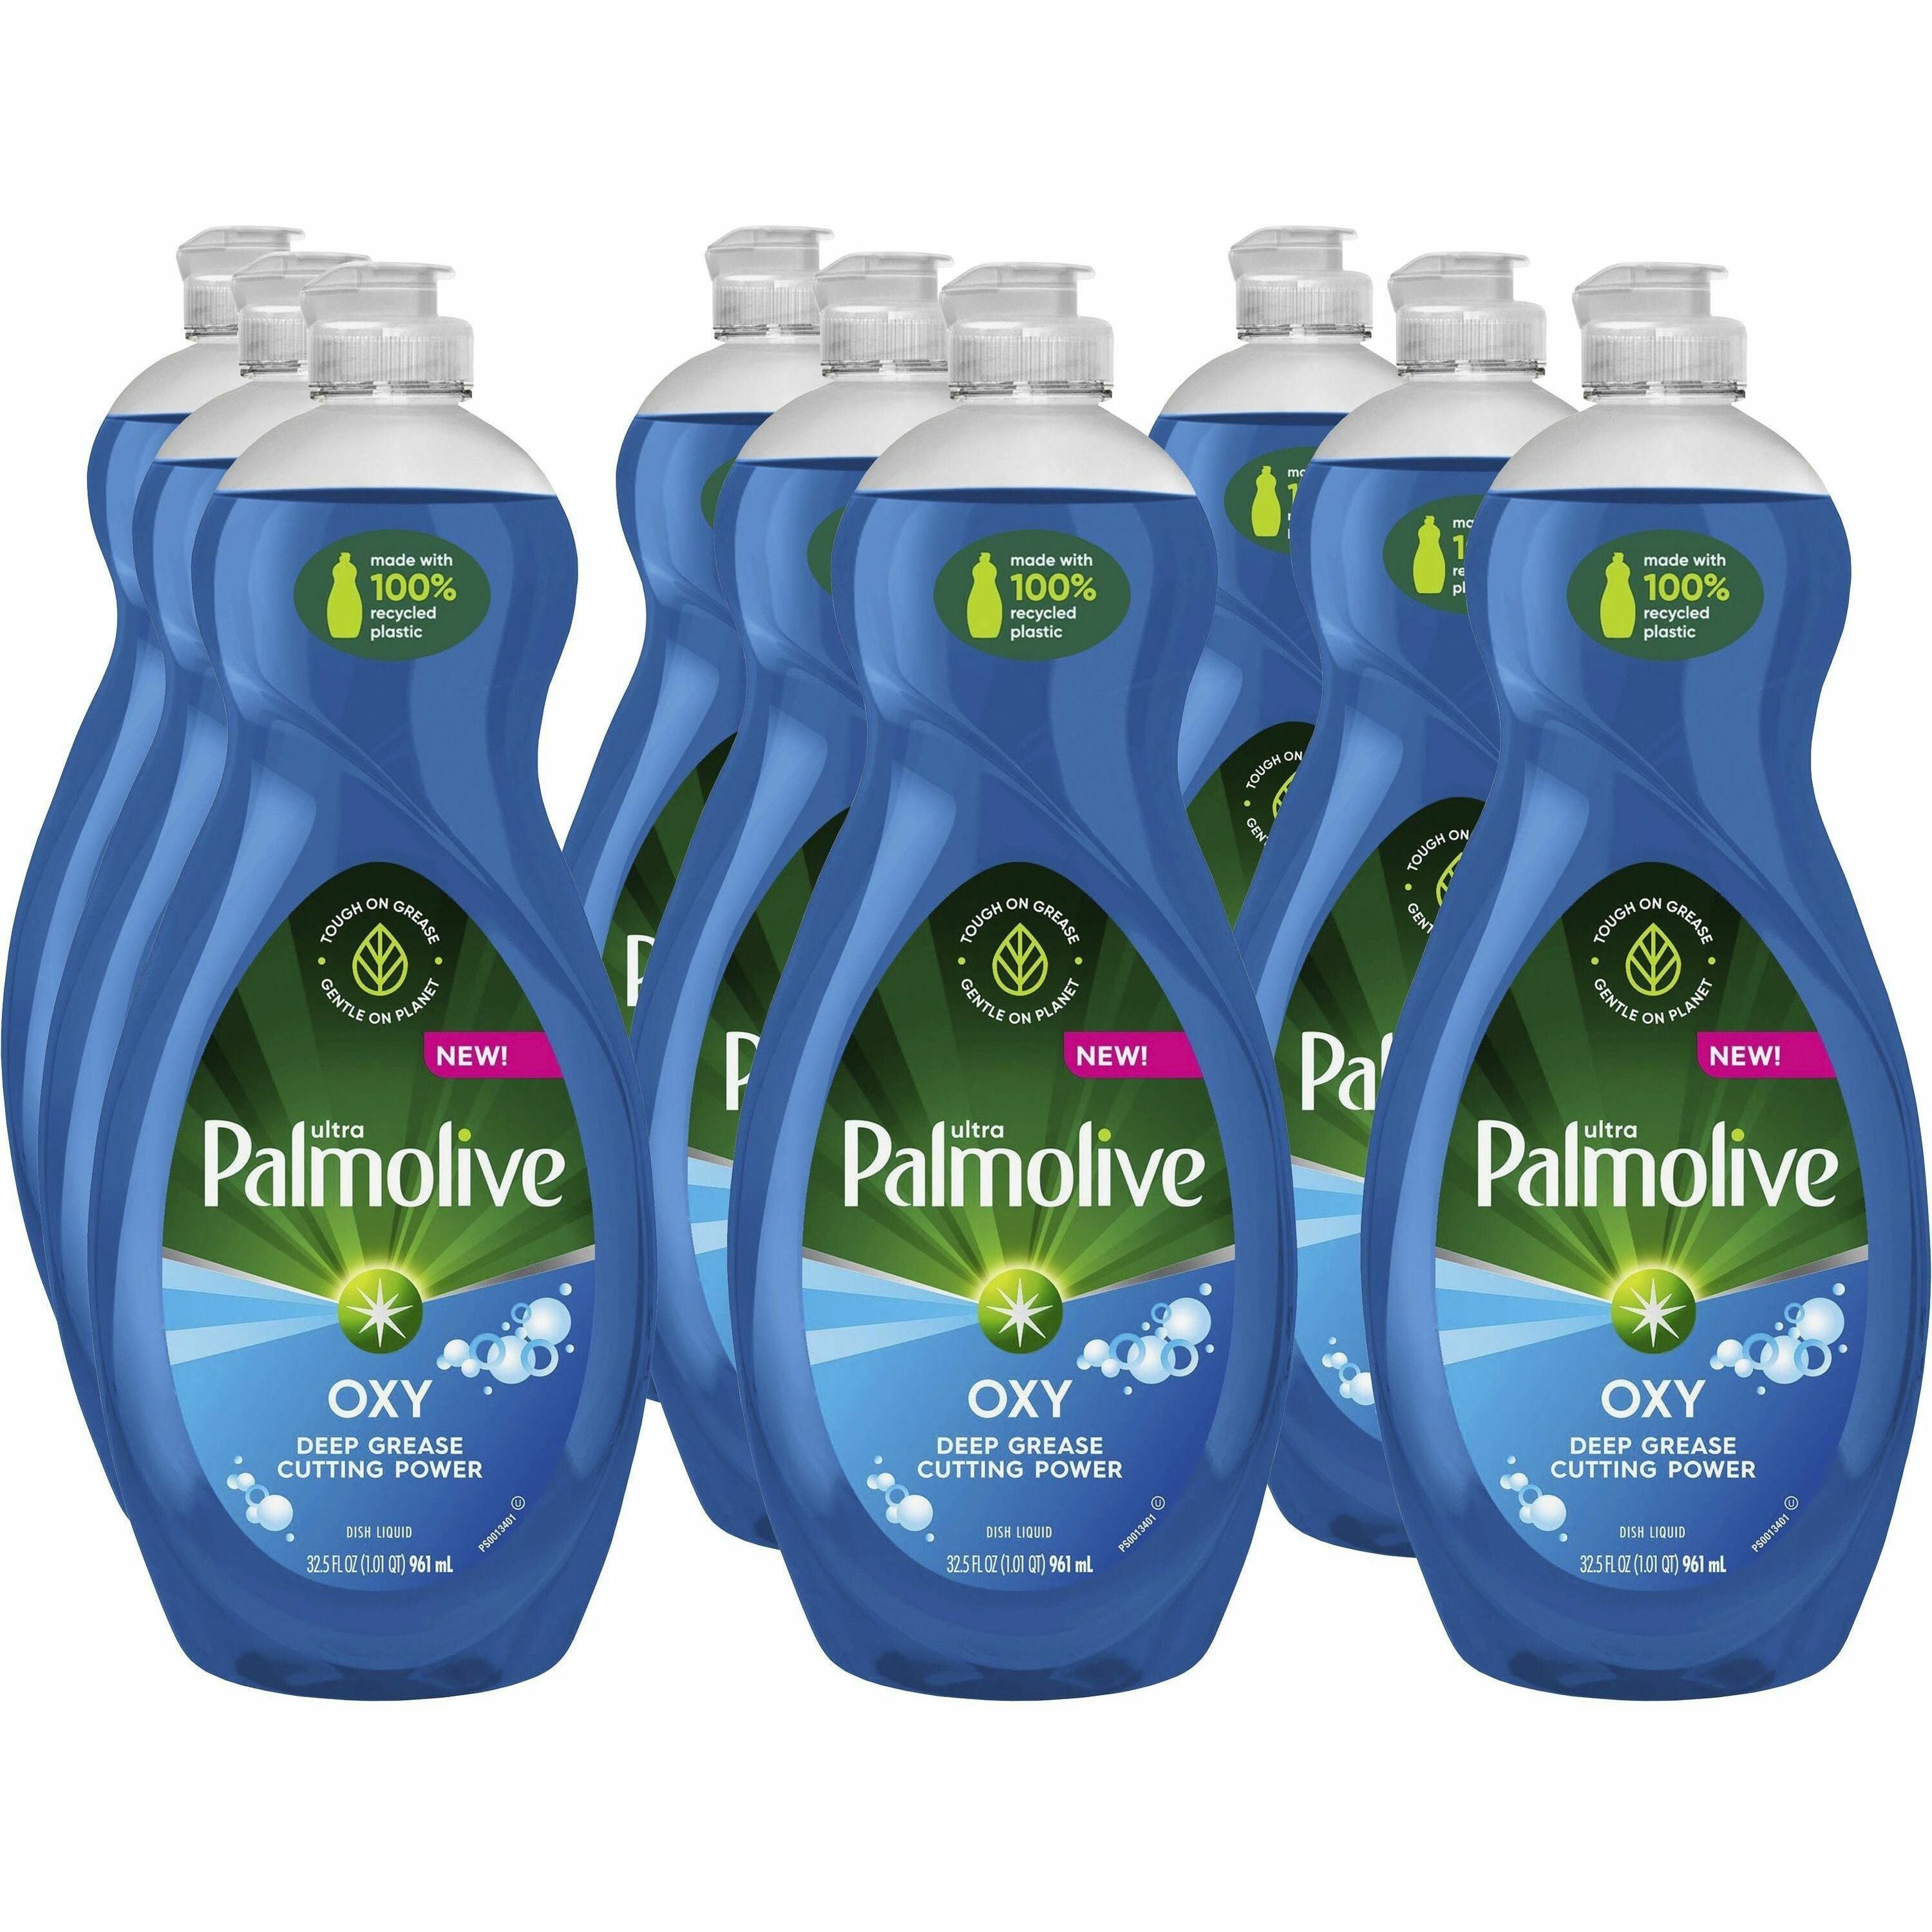 Palmolive Ultra Dish Soap Oxy Degreaser - Concentrate - 32.5 fl oz (1 quart) - 9 / Carton - Residue-free, Soft, Biodegradable, Phosphate-free, Paraben-free, Eco-friendly - Multi - 1